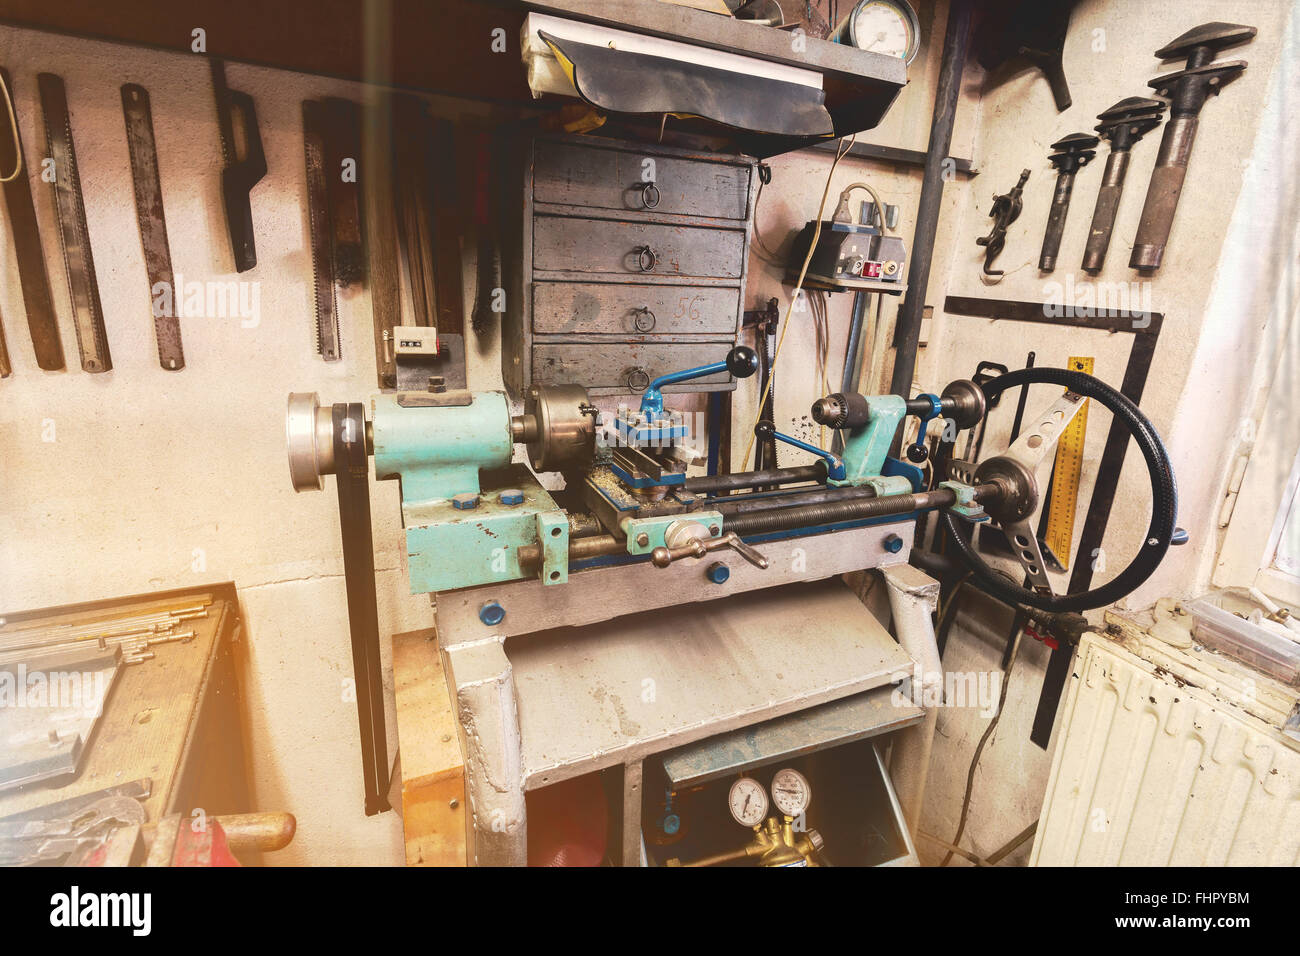 real domestic DIY home workshop full of tools, untidy, ready for work,  detail of homemade lathe, retro vintage color tone Stock Photo - Alamy